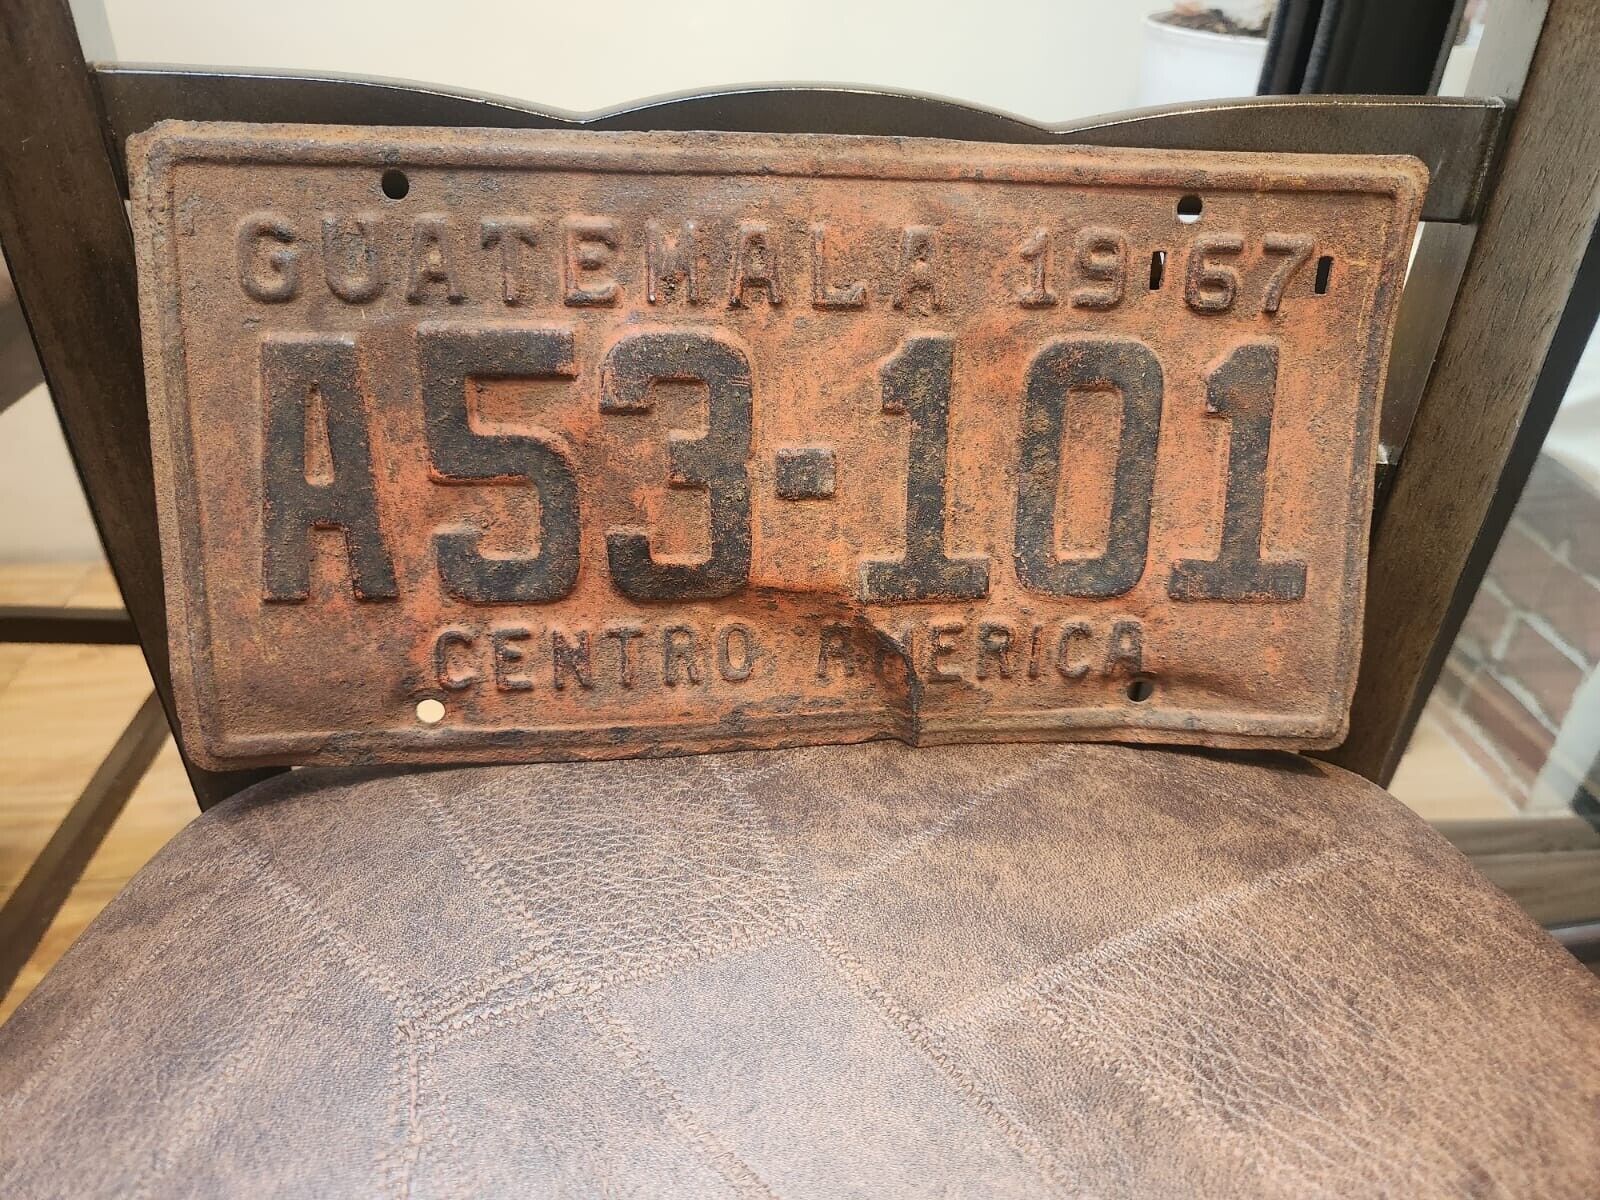 License plate Guatemala 1967 letter A